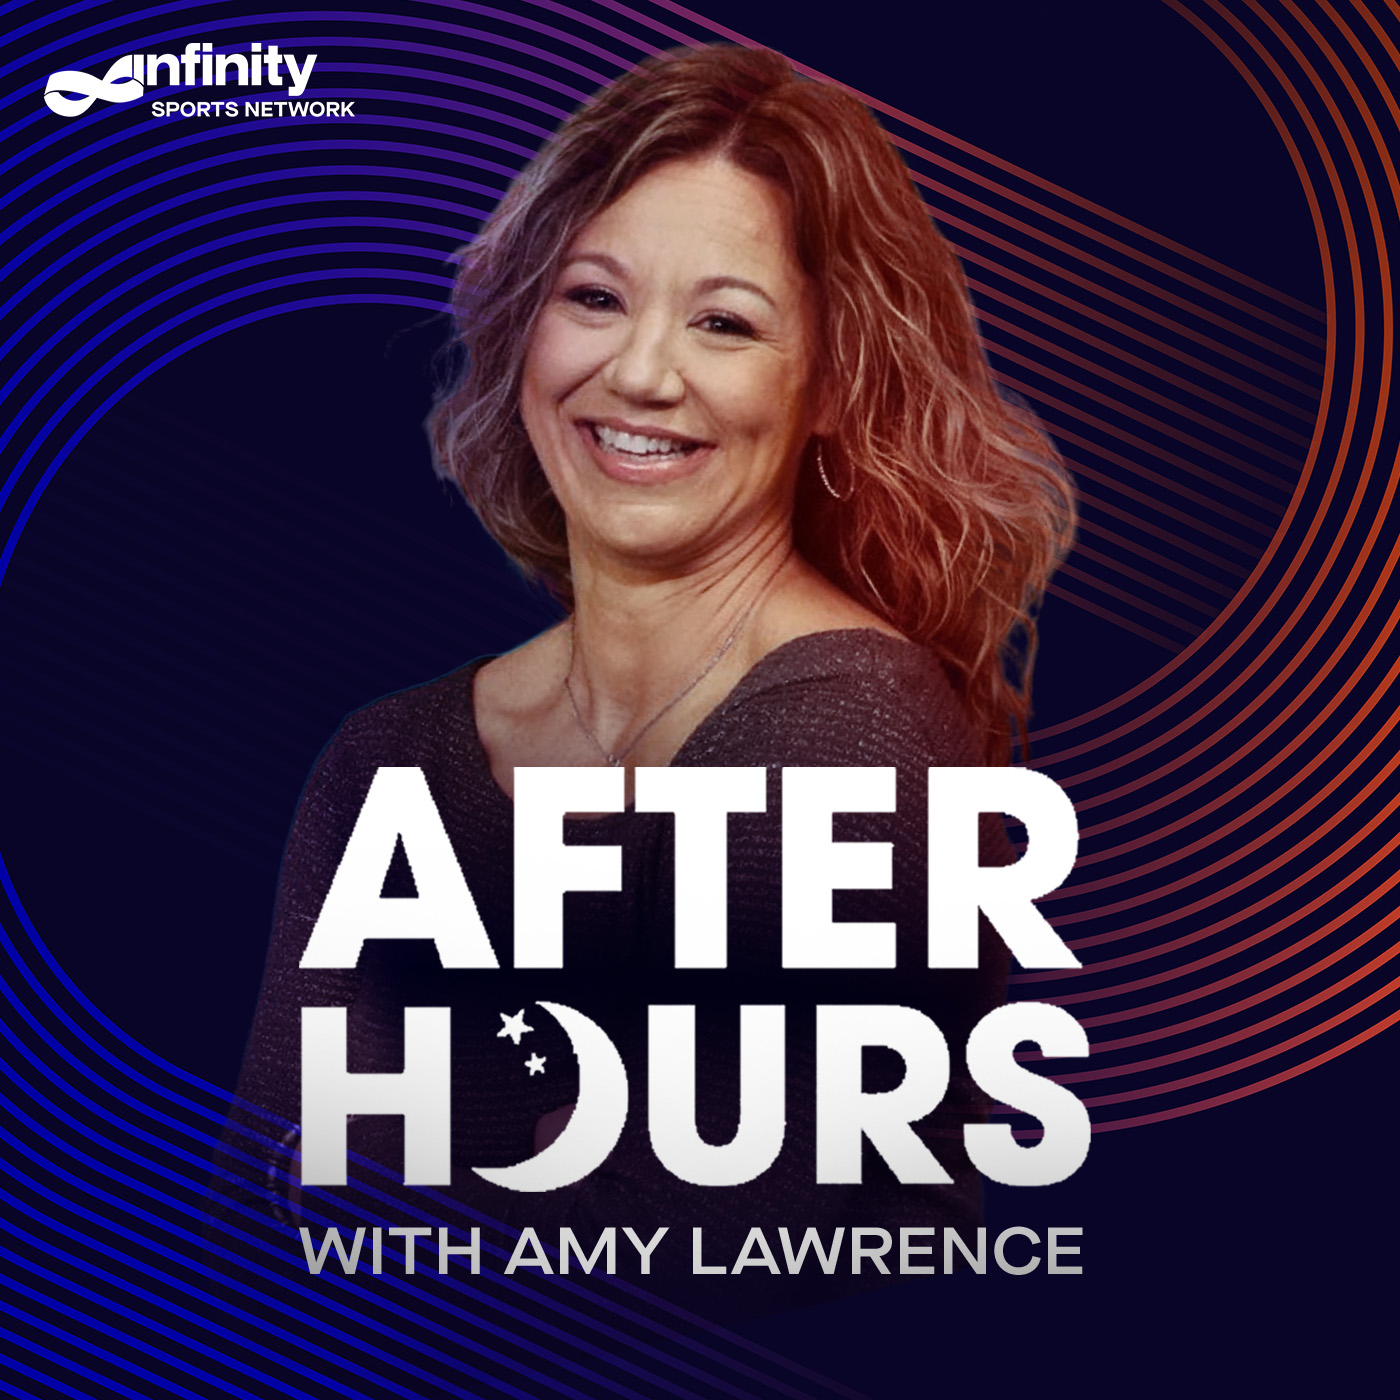 7/12/21 After Hours with Amy Lawrence PODCAST: Hour 3